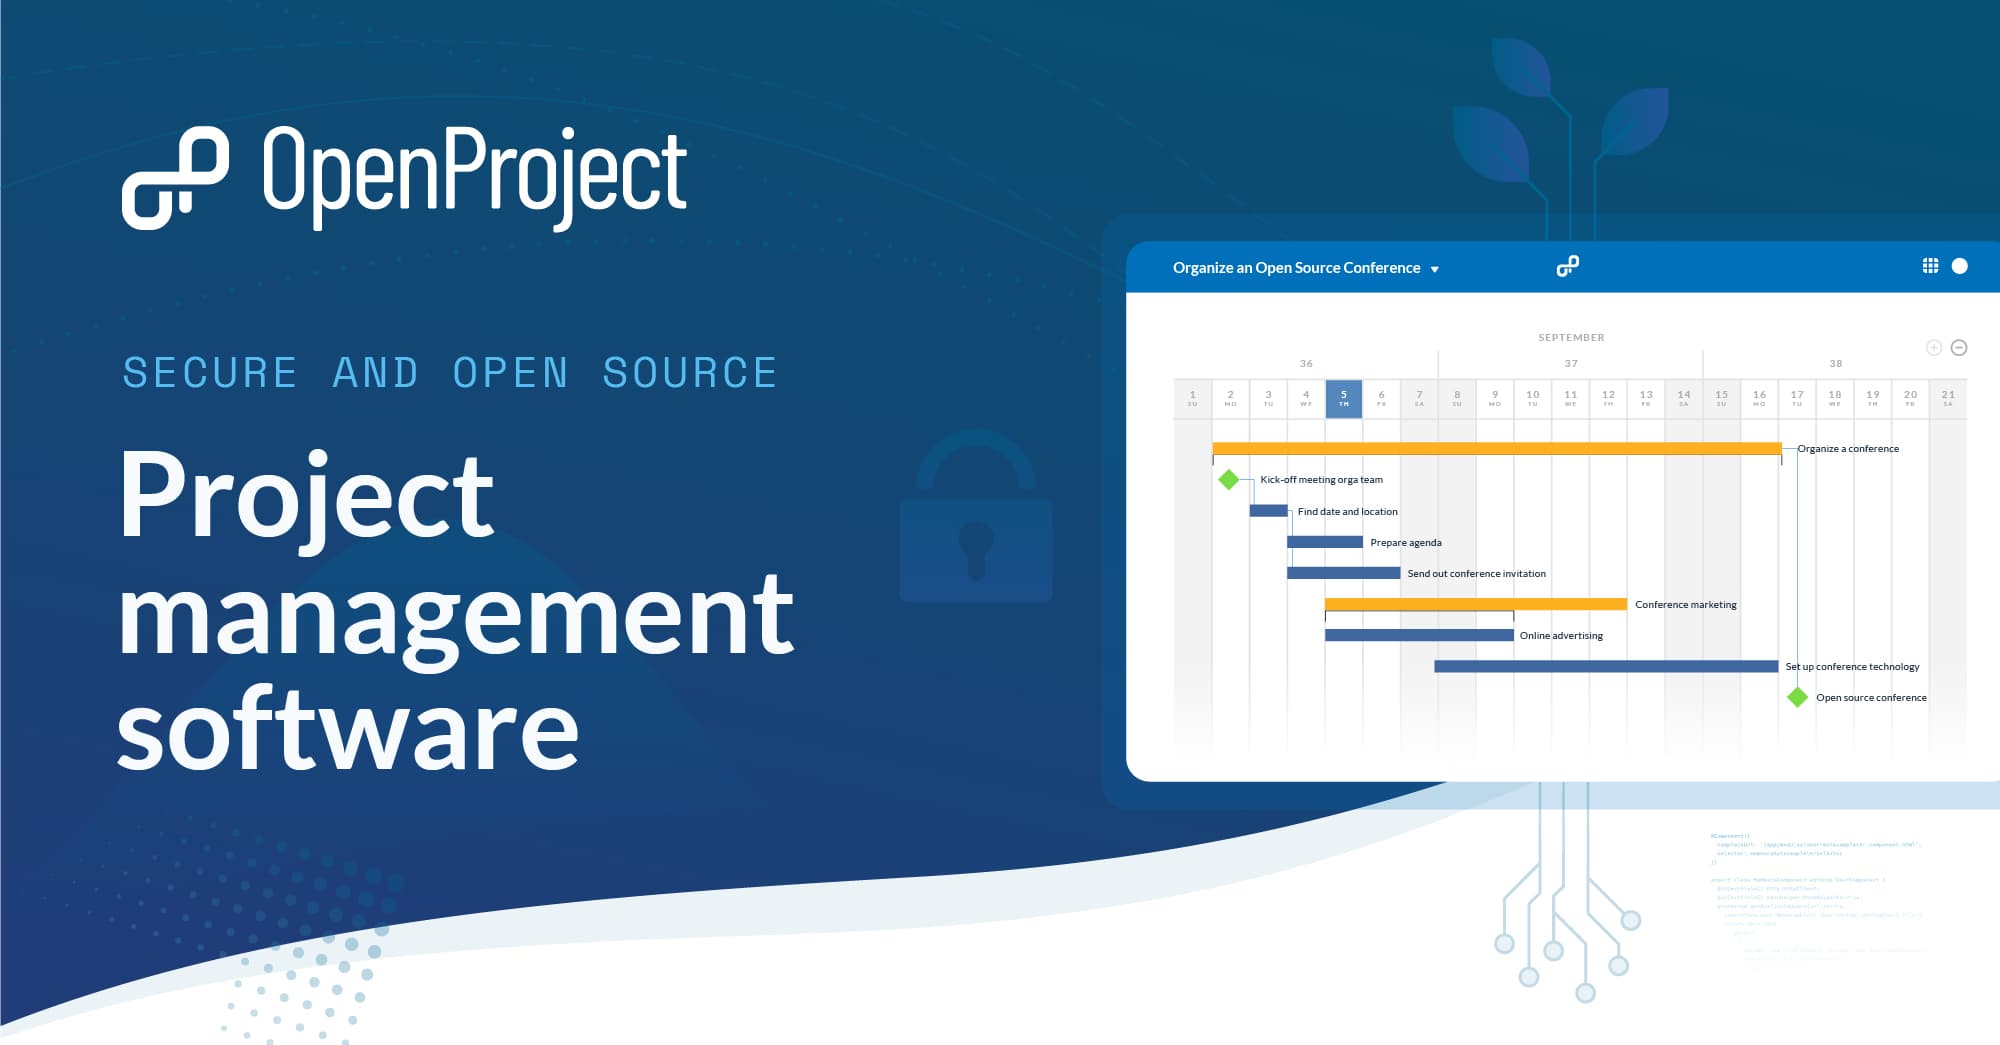 OpenProject - Open Source Project Management Software